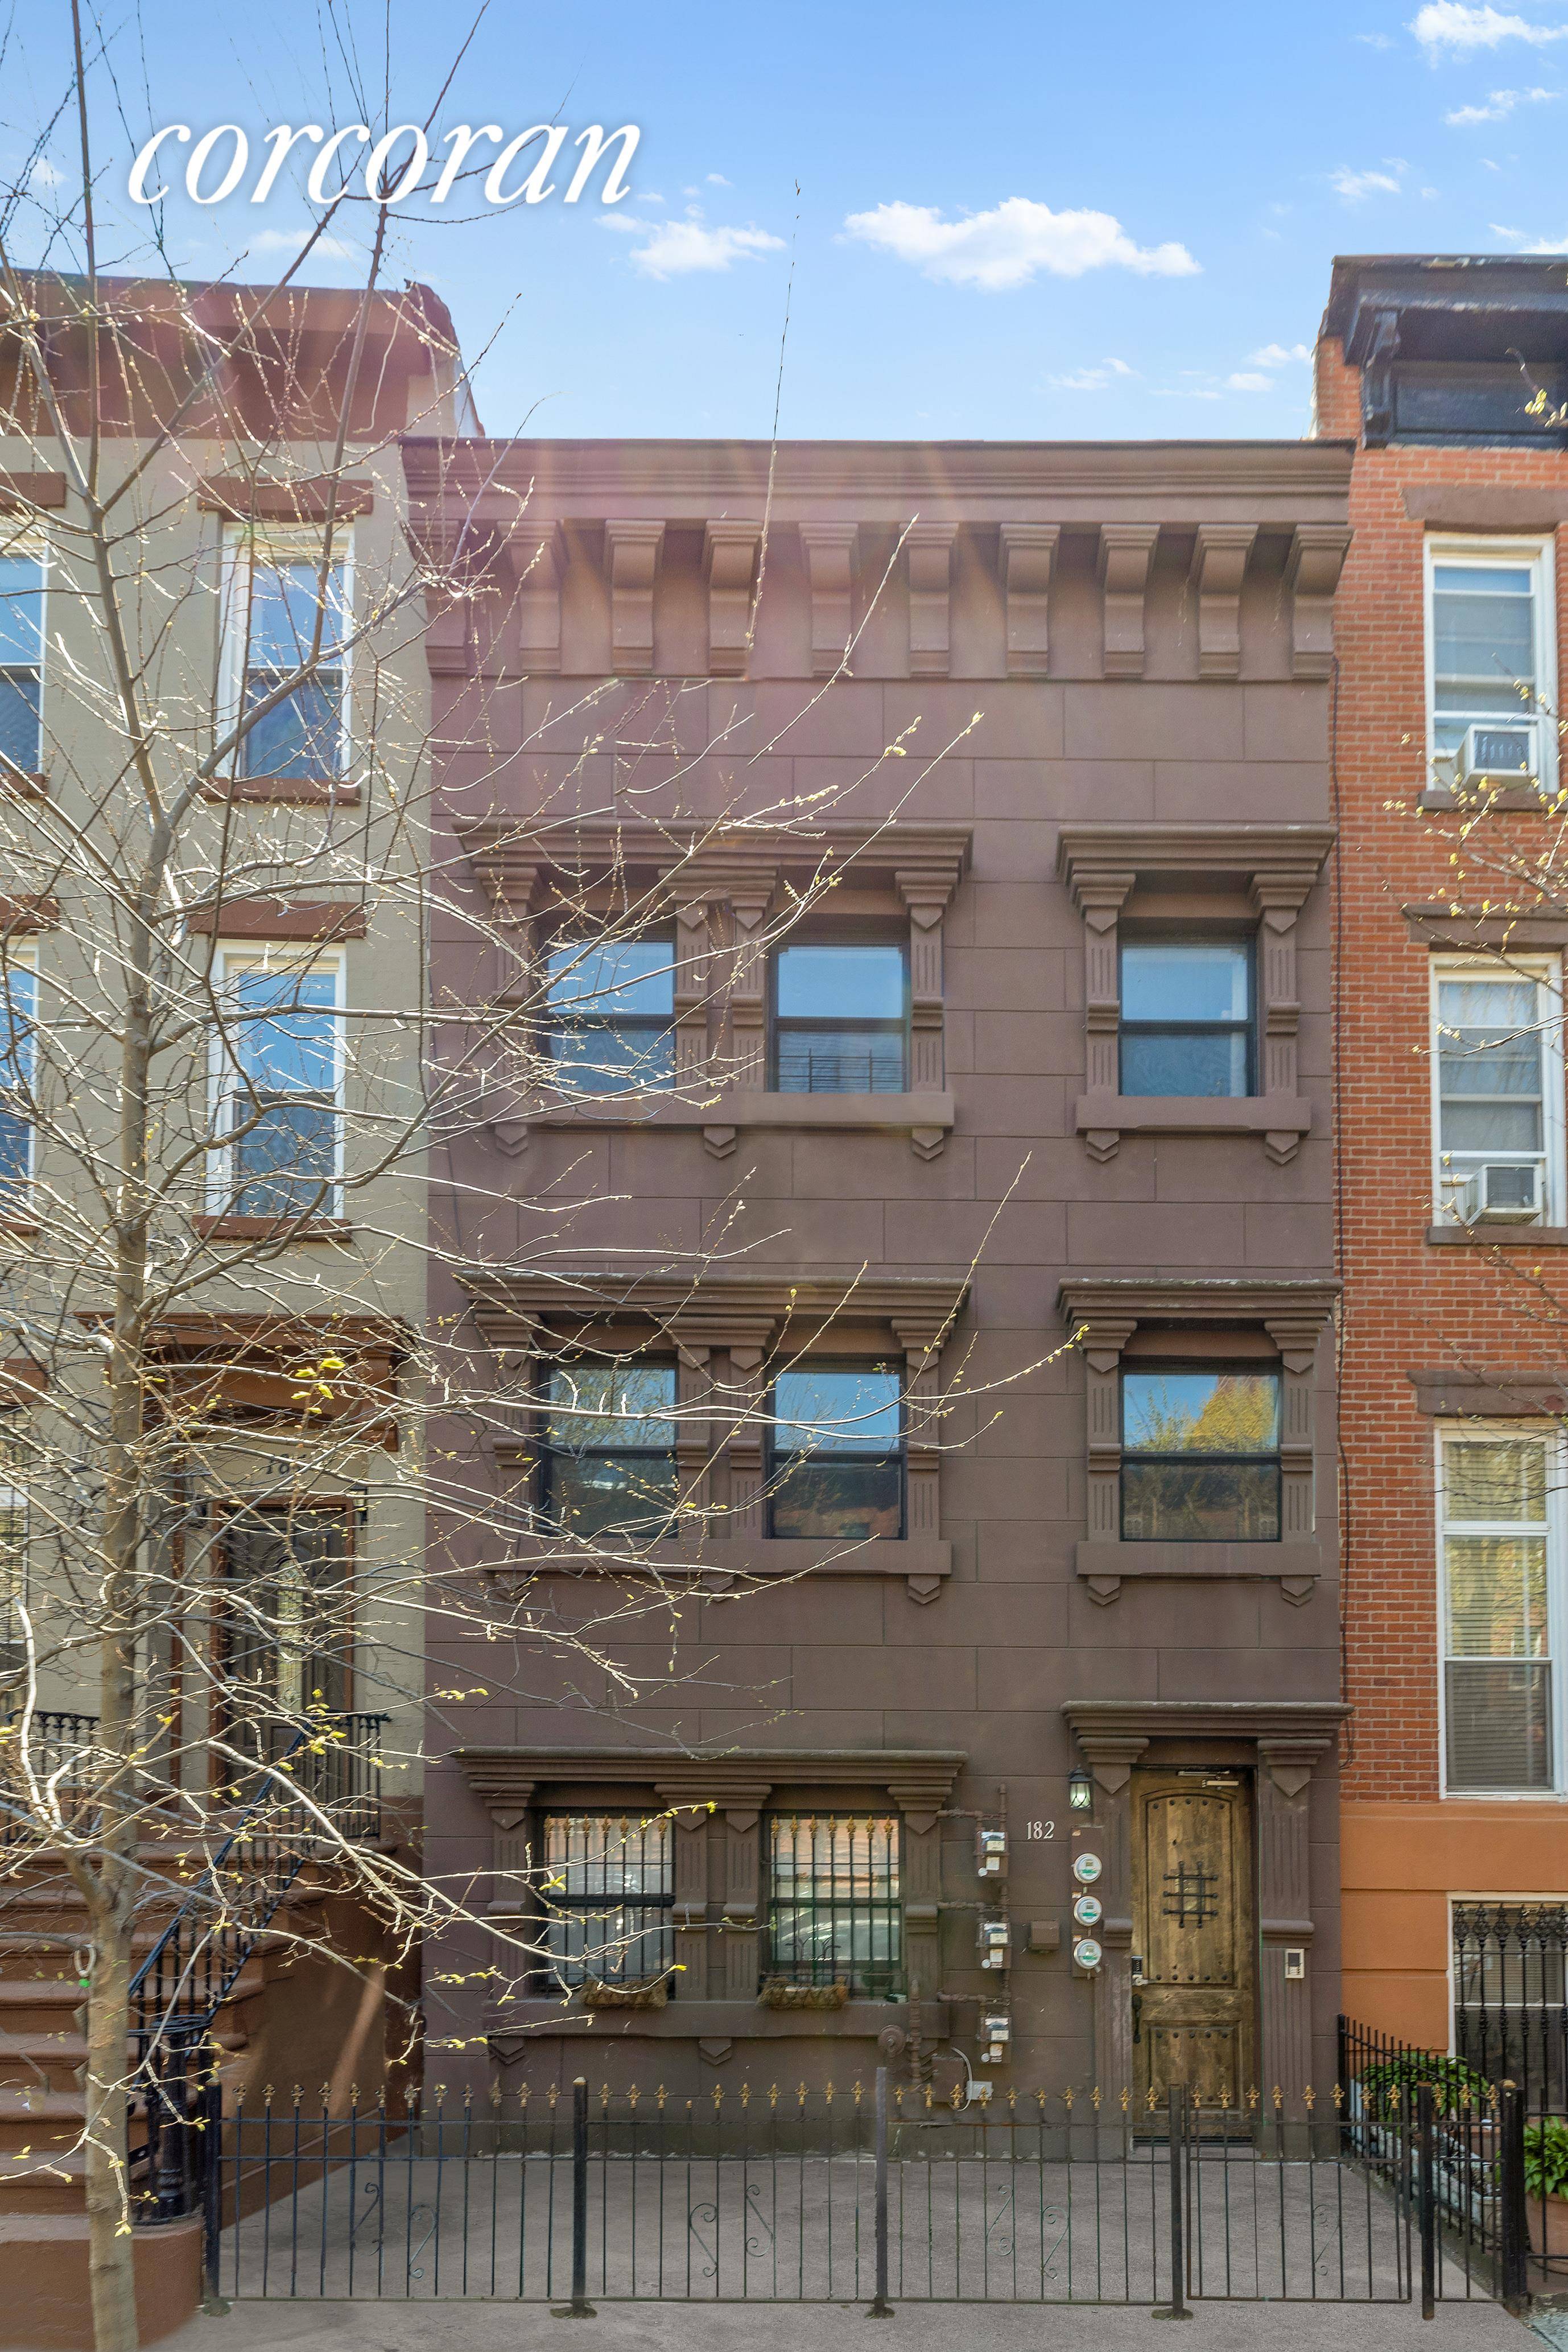 Welcome to 182 Herkimer St, a beautiful three family brownstone located on a tree line block in prime Bedford Stuyvesant.